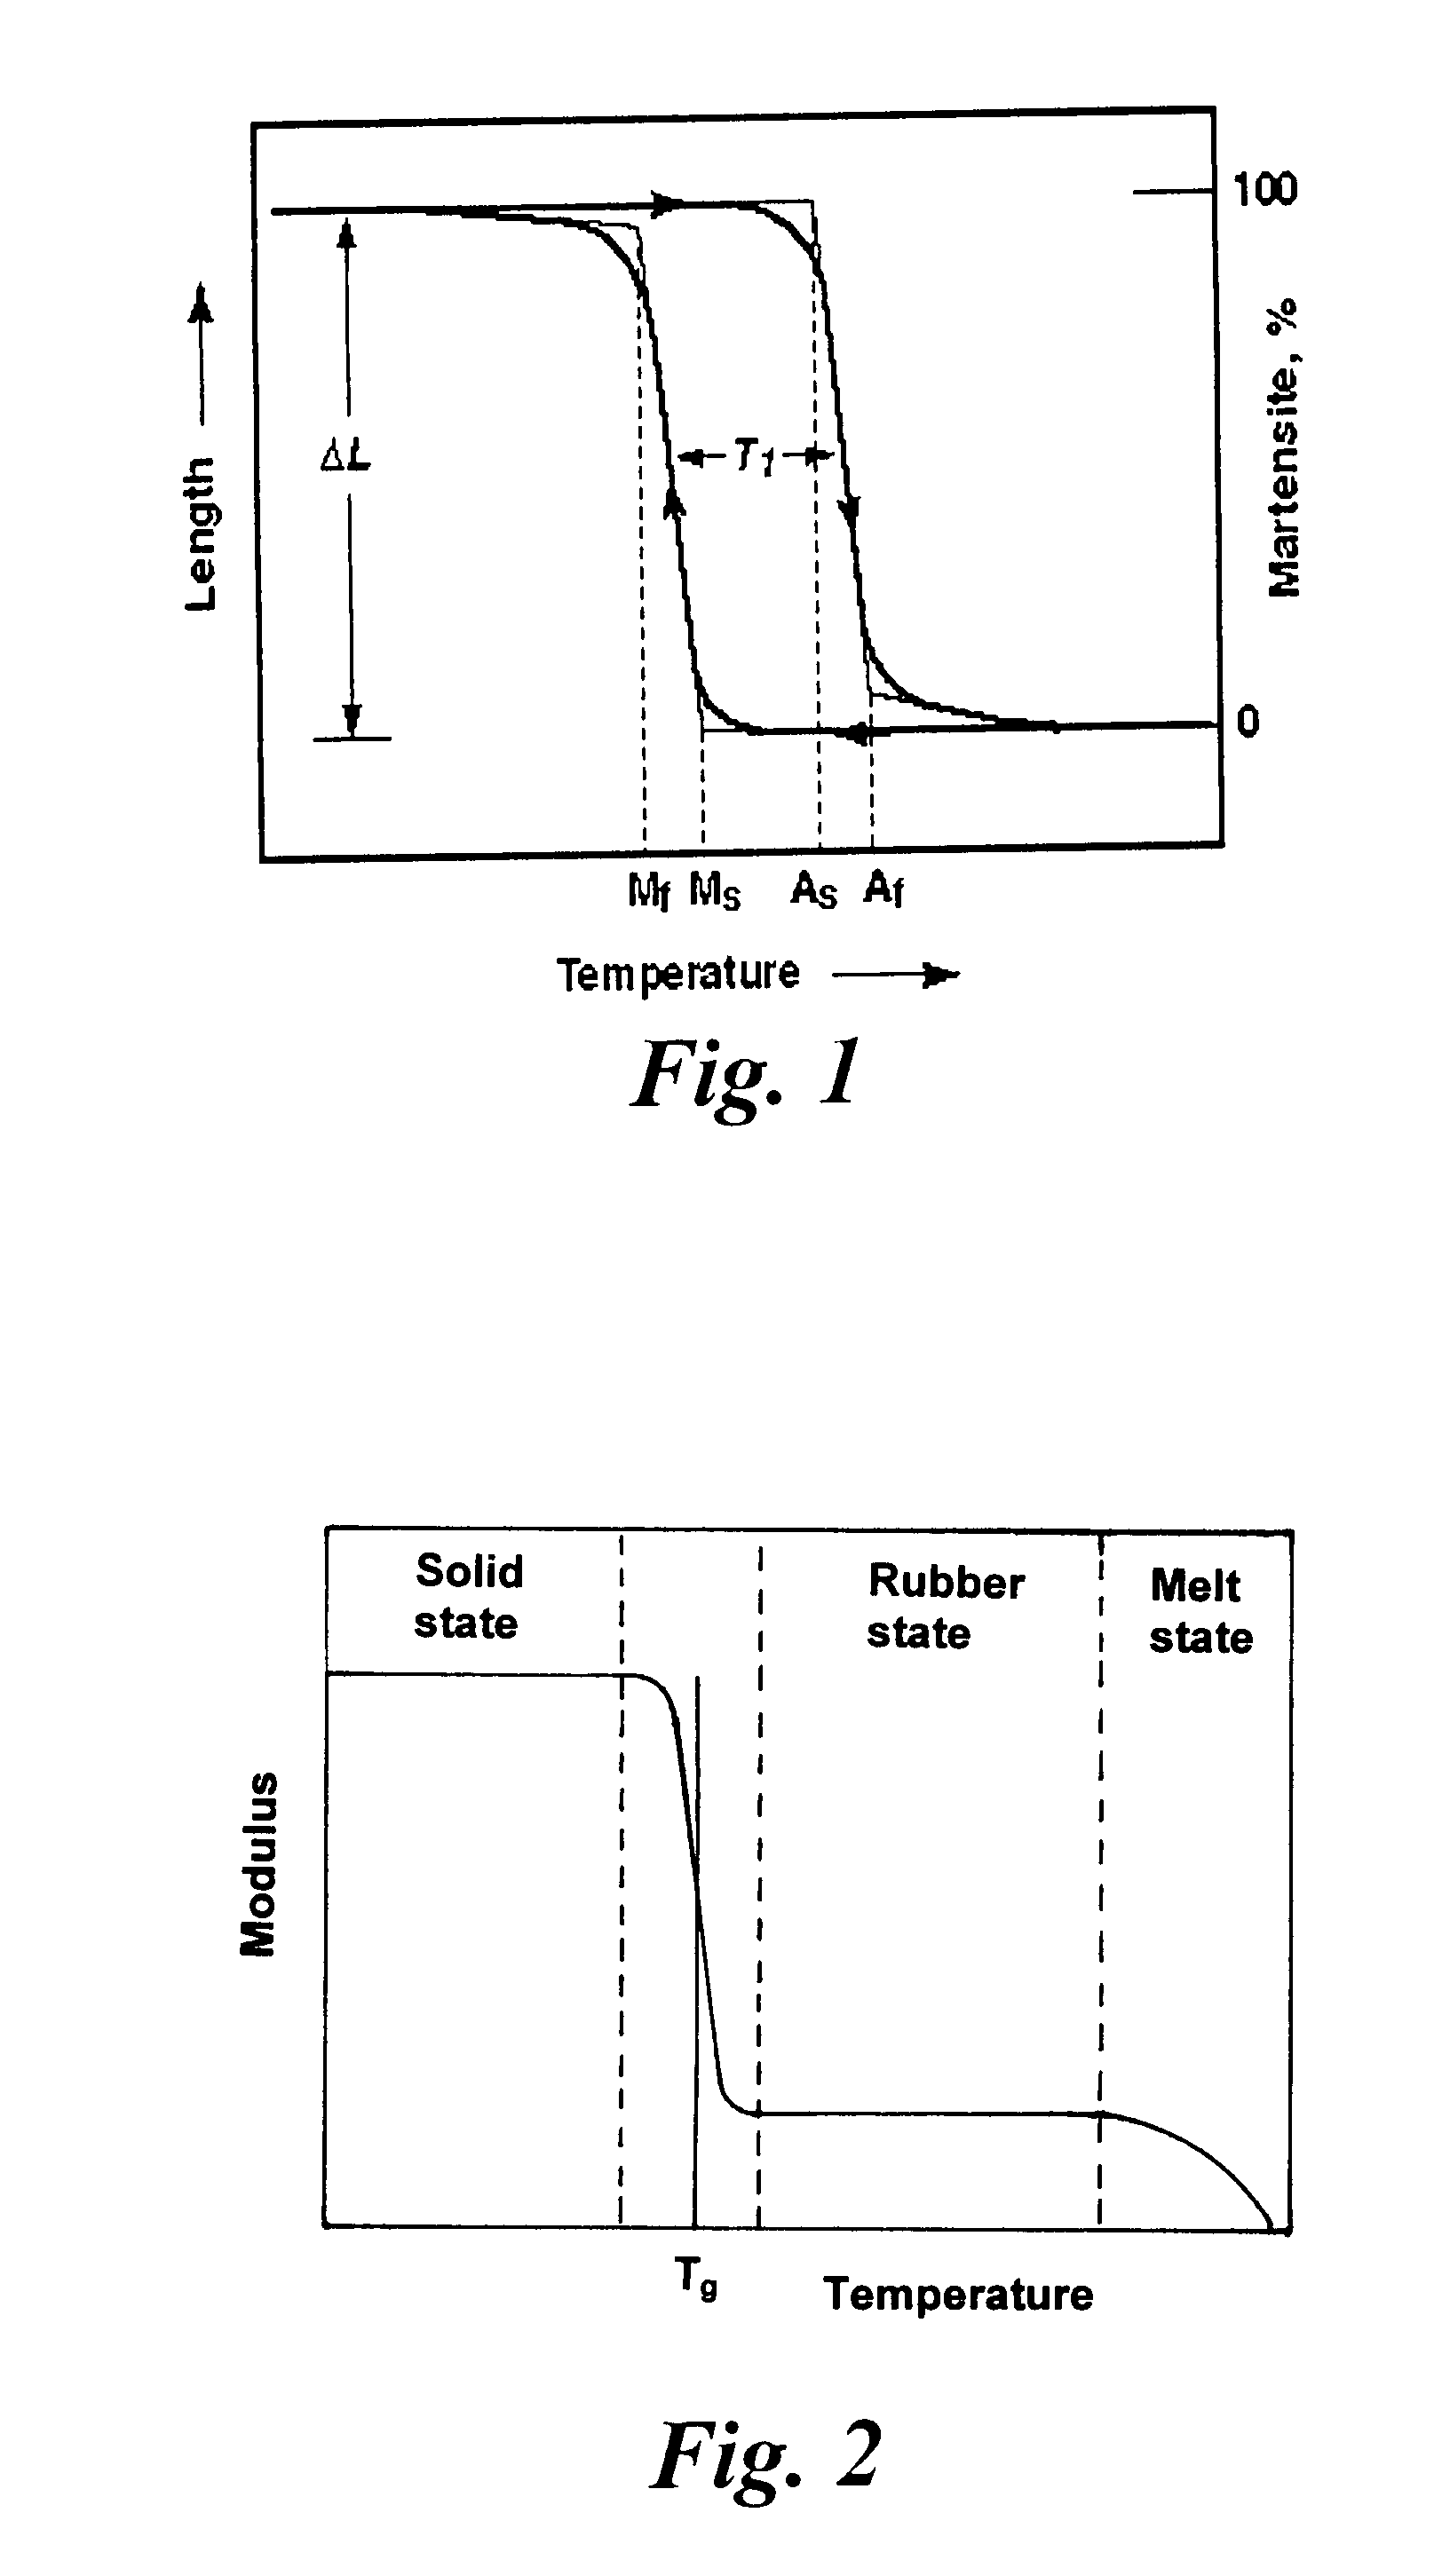 Remote indicating cumulative thermal exposure monitor and system for reading same